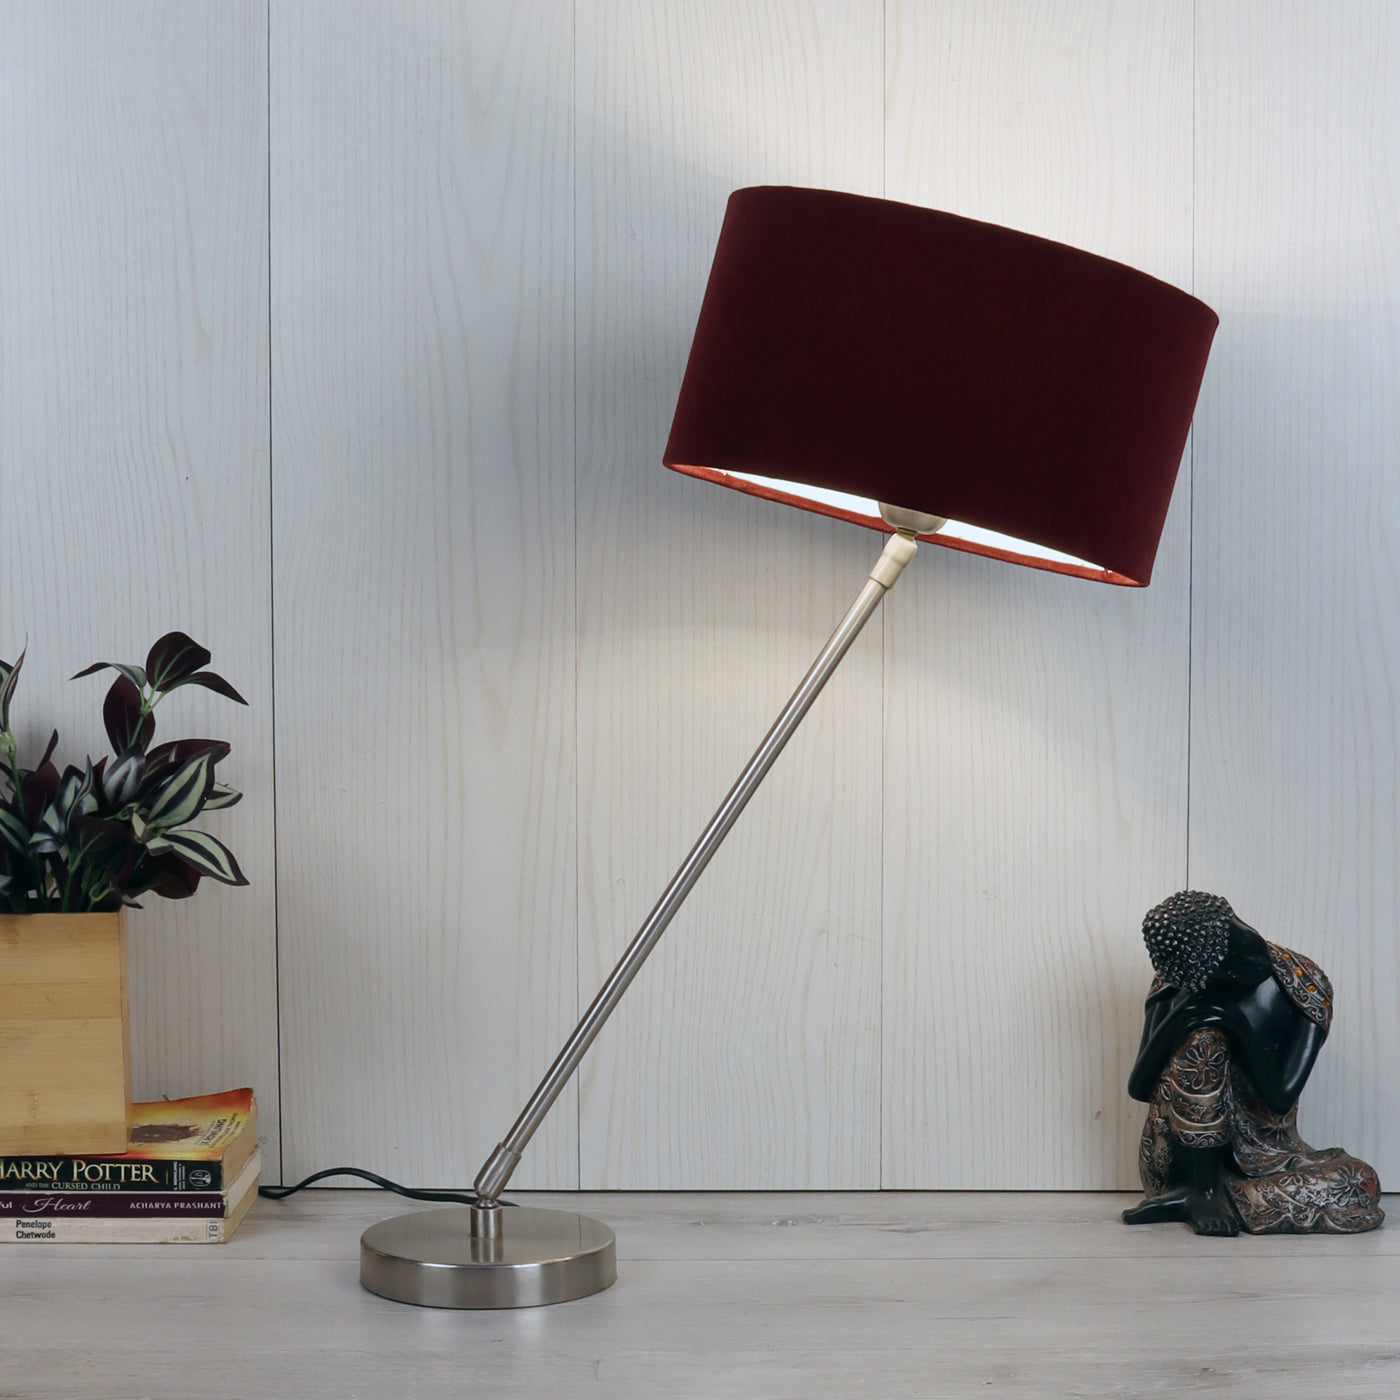 The "Large Silver MJ  Lamp" with Red velvet shade